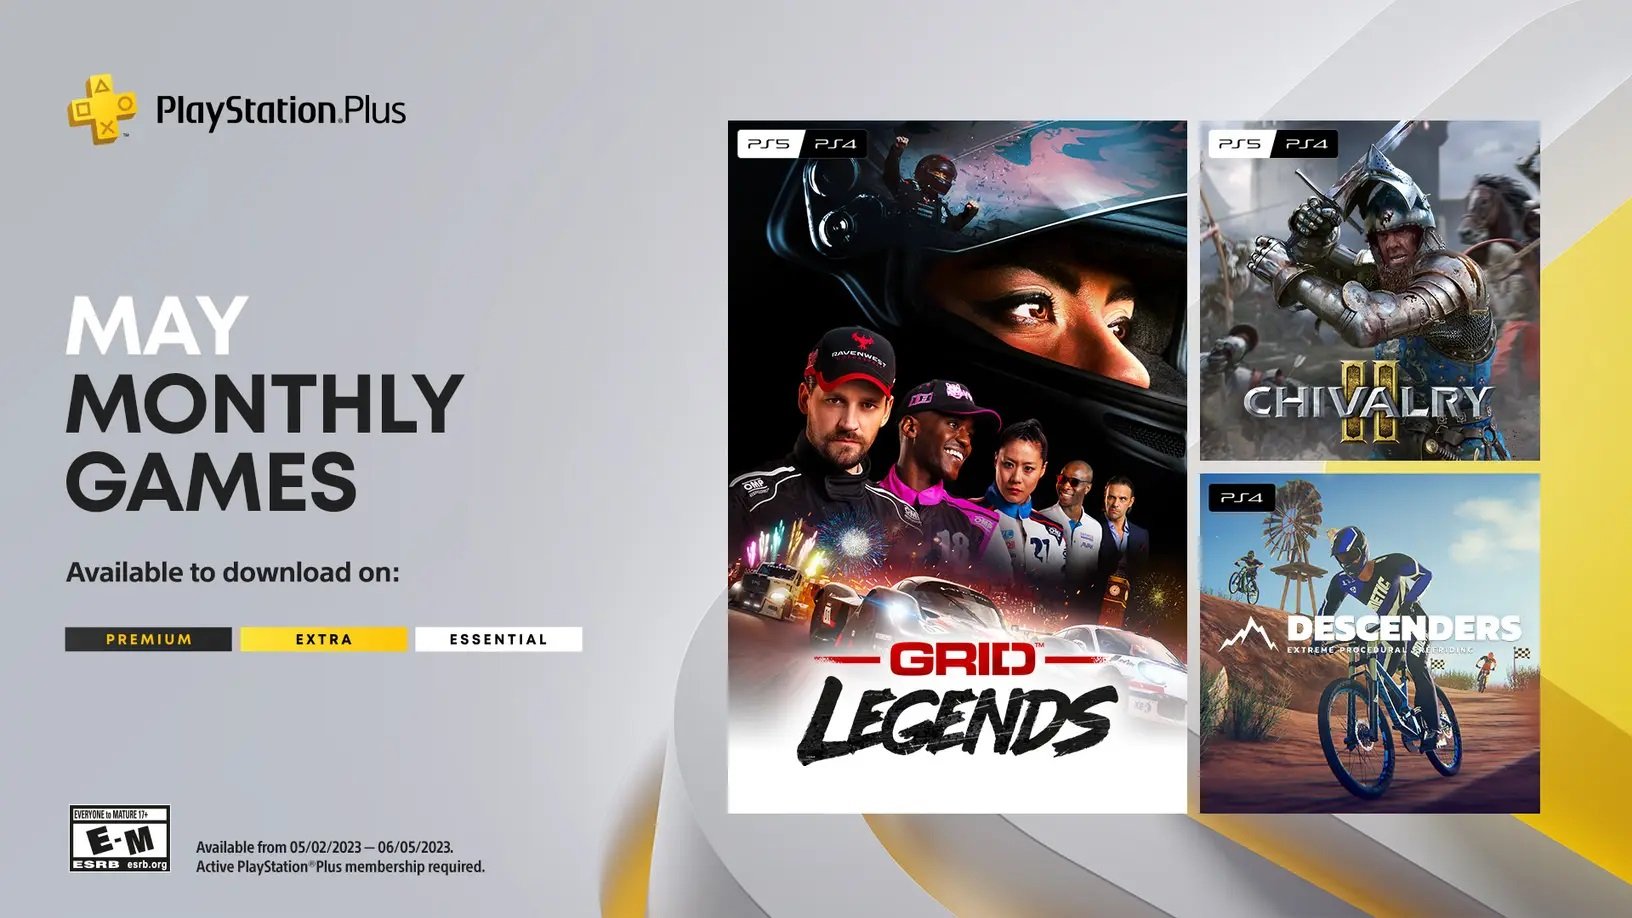 Sony details dozens of games coming to revamped PlayStation Plus catalogue